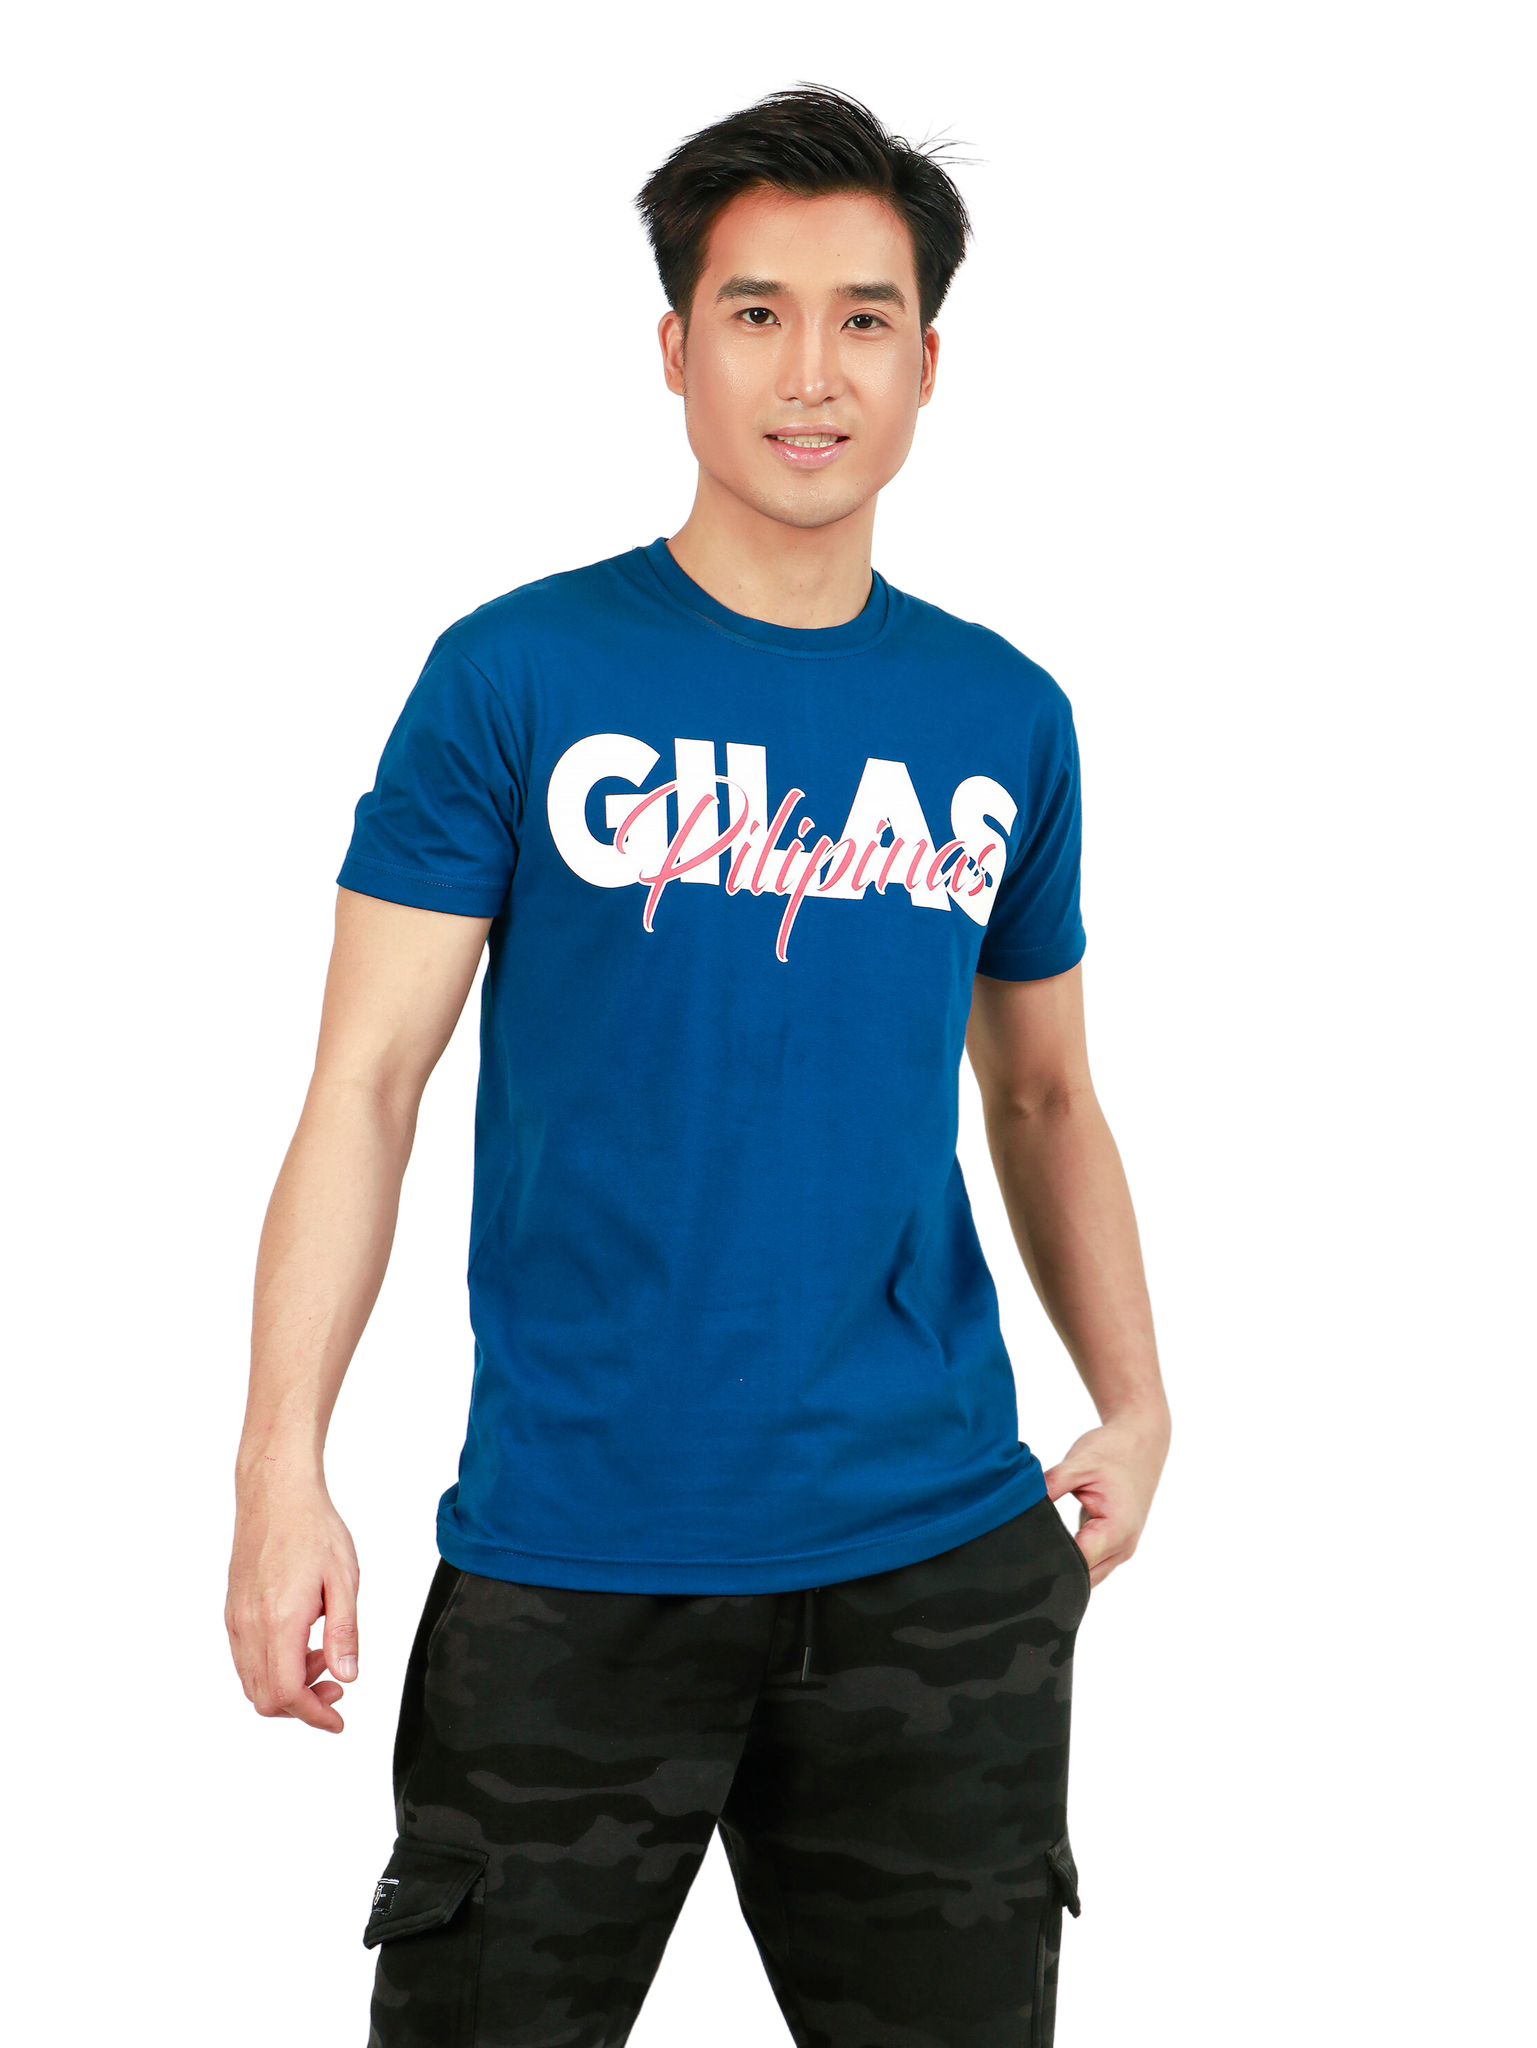 GILAS PILIPINAS in Blue for Mens